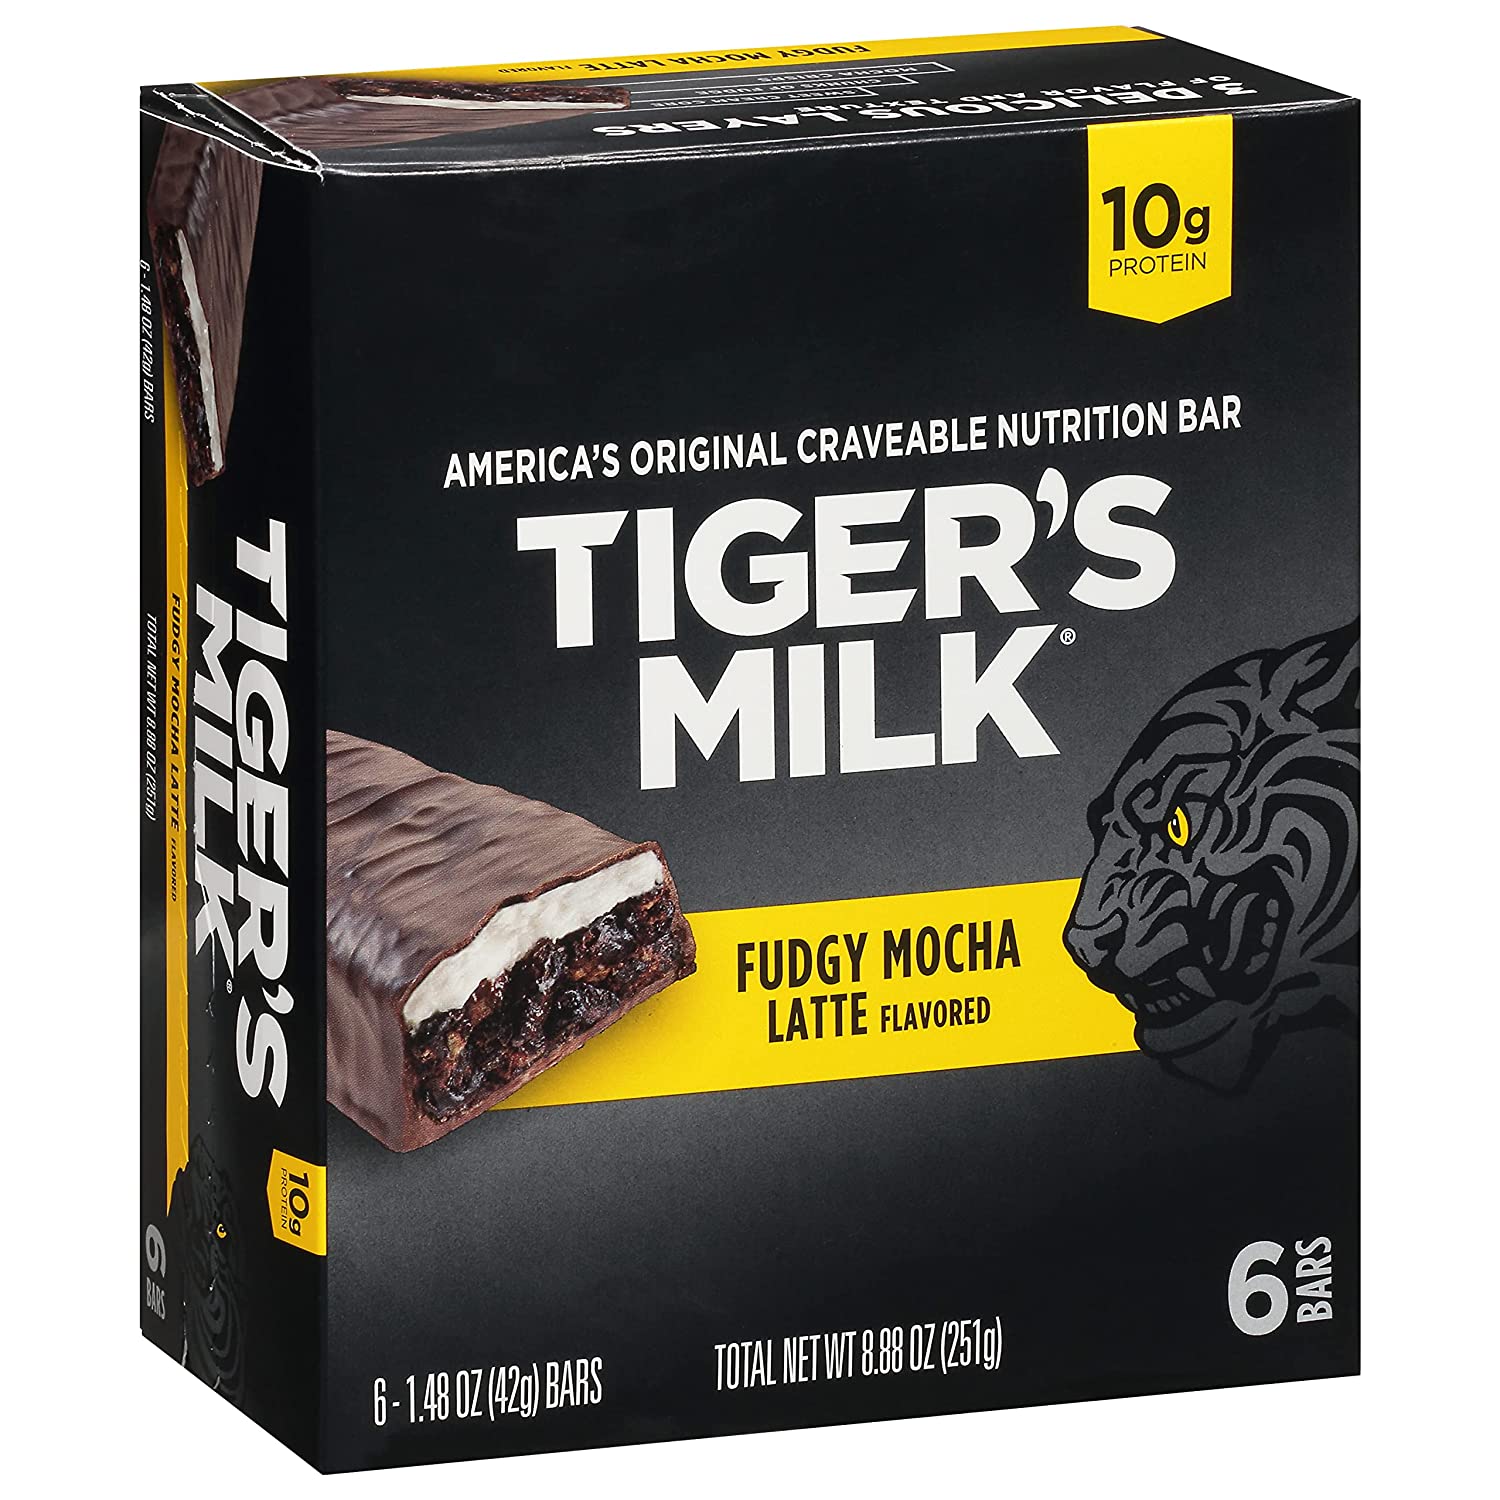 6-Pack Tiger's Milk Protein Bars (Fudgy Mocha Latte, Cinnamon Churro, Peanut Butter Chocolate Crunch) $5.05 w/ S&S + Free S&H w/ Prime or $25+